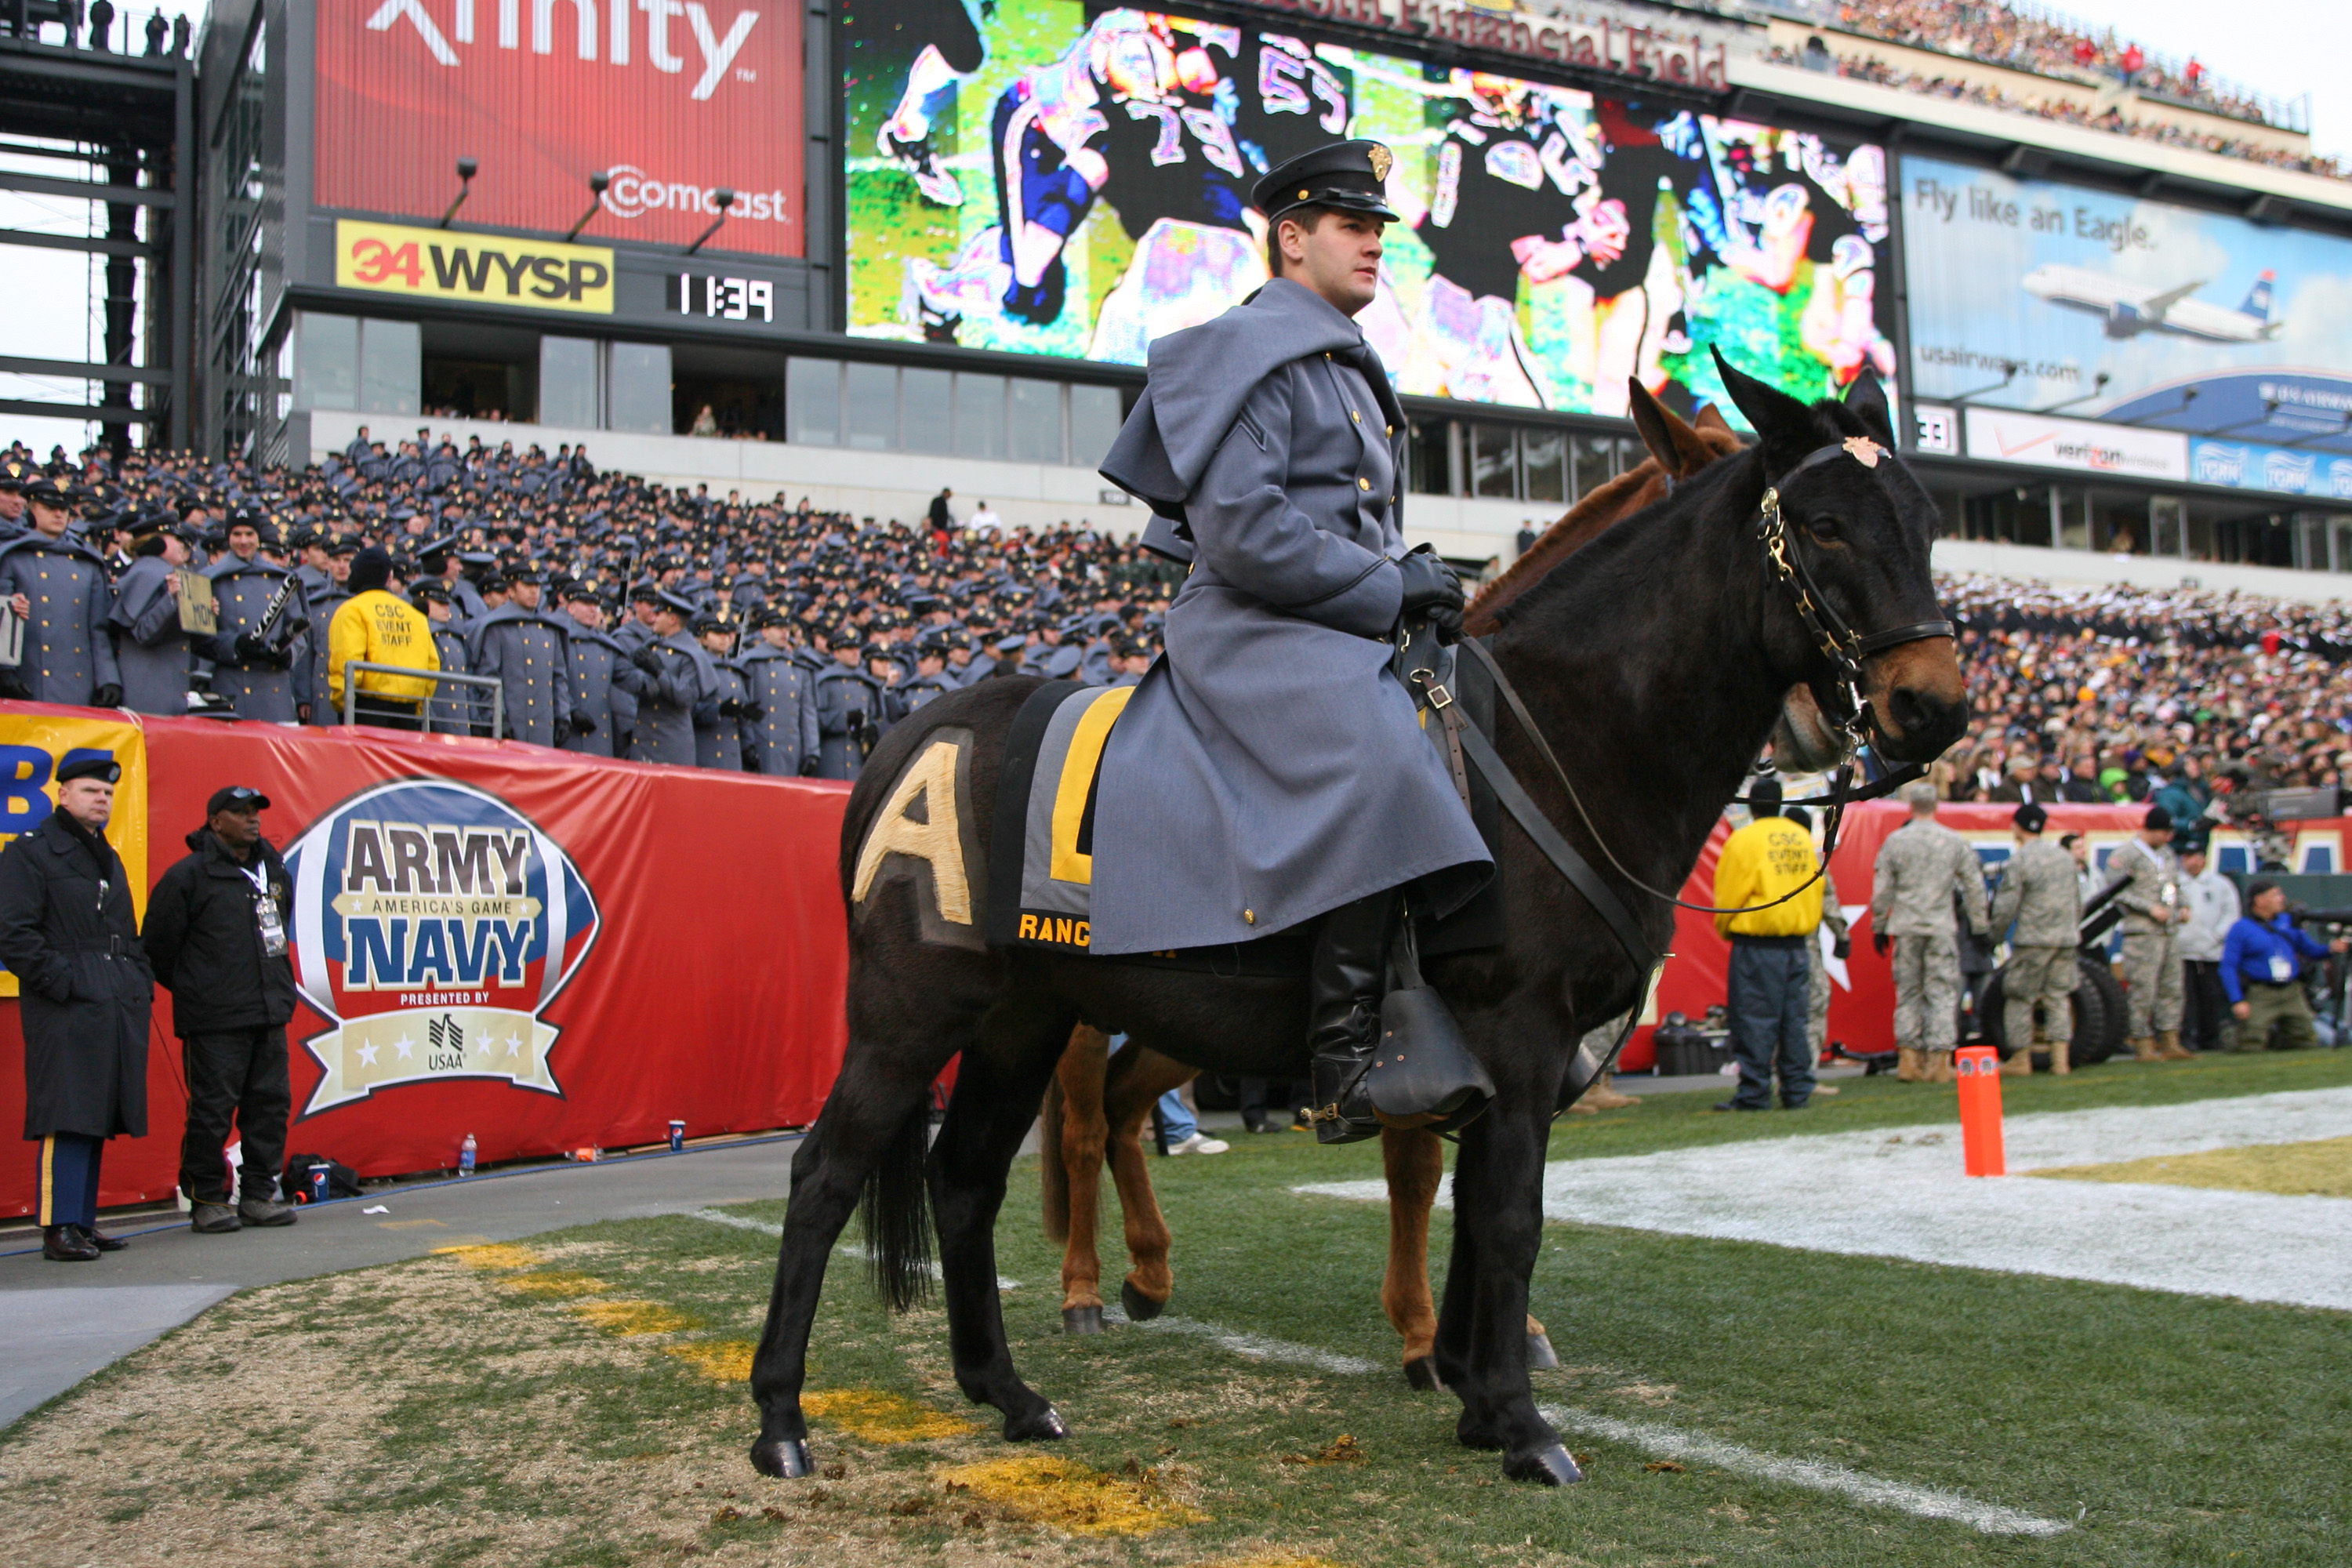 PHILADELPHIA - DECEMBER 11: An Army cadet sits on the Army mule during a game against the Navy Midshipmen on December 11, 2010 at Lincoln Financial Field in Philadelphia, Pennsylvania. The Midshipmen won 31-17. (Photo by Hunter Martin/Getty Images)